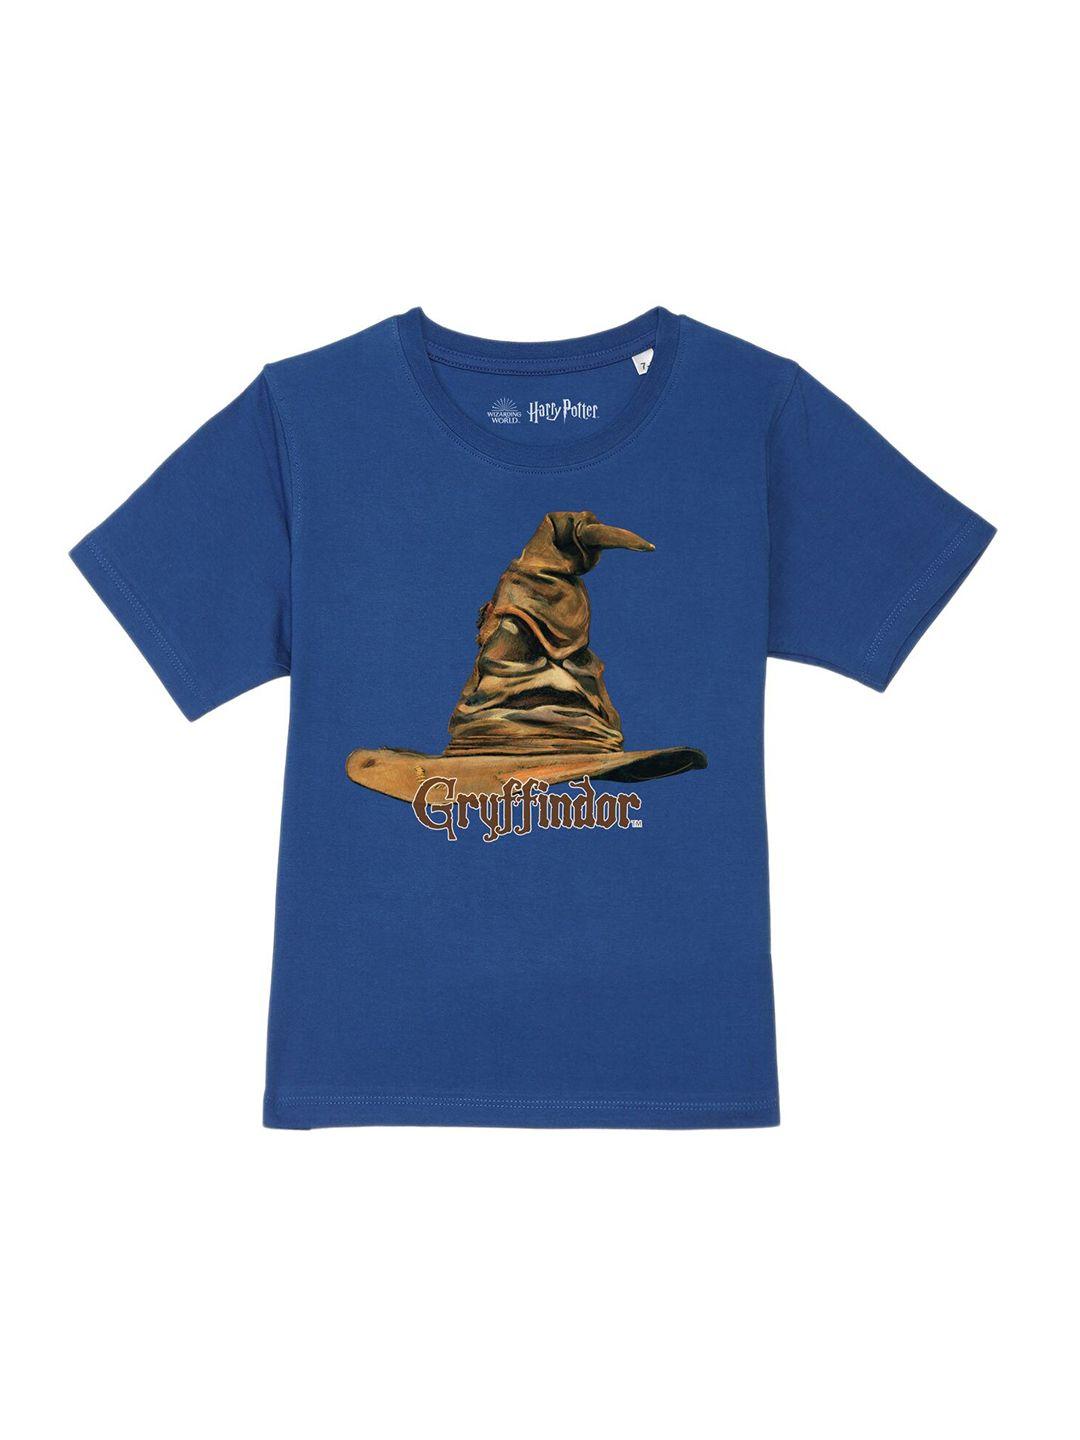 harry potter by wear your mind boys blue printed t-shirt